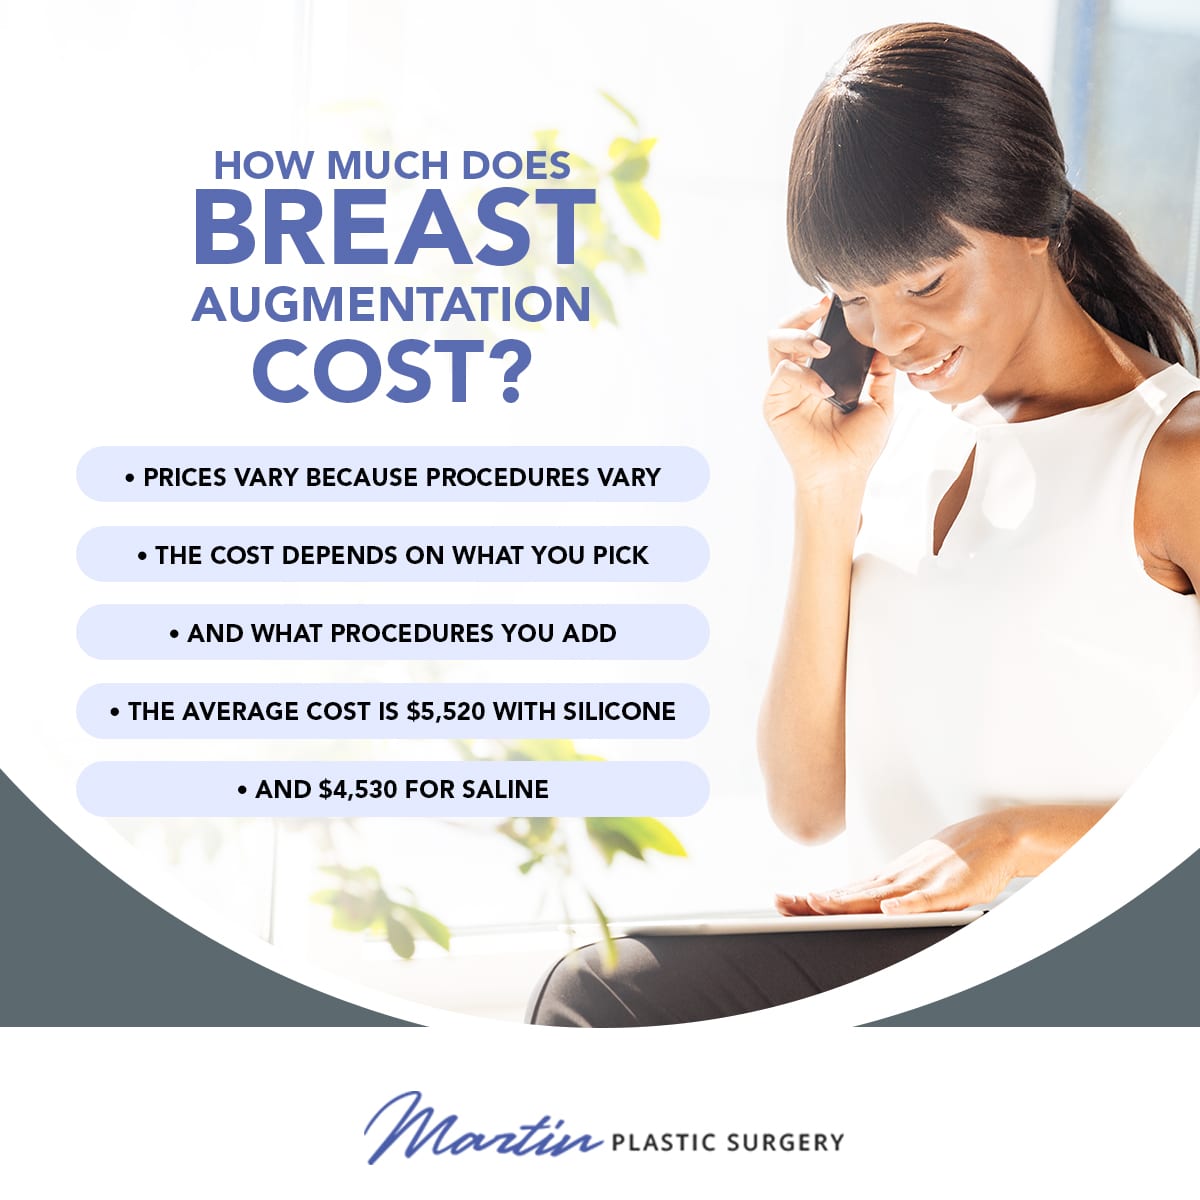 How Much Does Breast Augmentation Cost? [Infographic] img 1